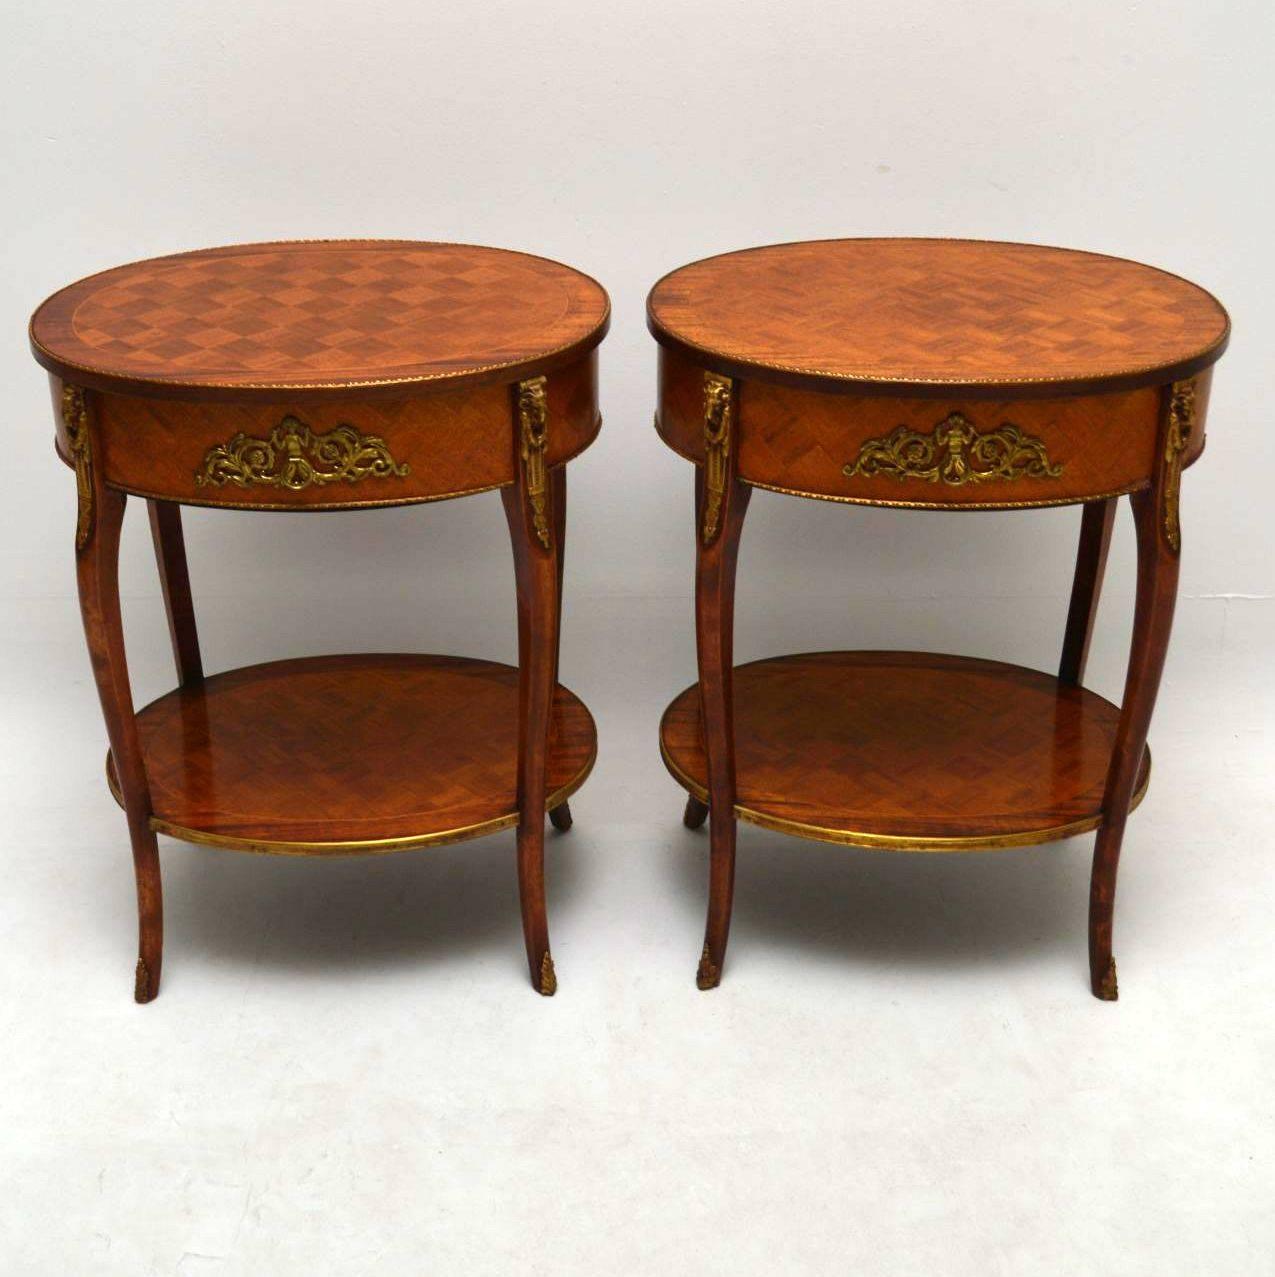 Pair of antique French parquetry lamp or side tables with gilt bronze mounts, handles and feet. The mounts are very good quality and check out the rams heads mounts on the tops of the legs. The table tops and lower tier tops have parquetry with